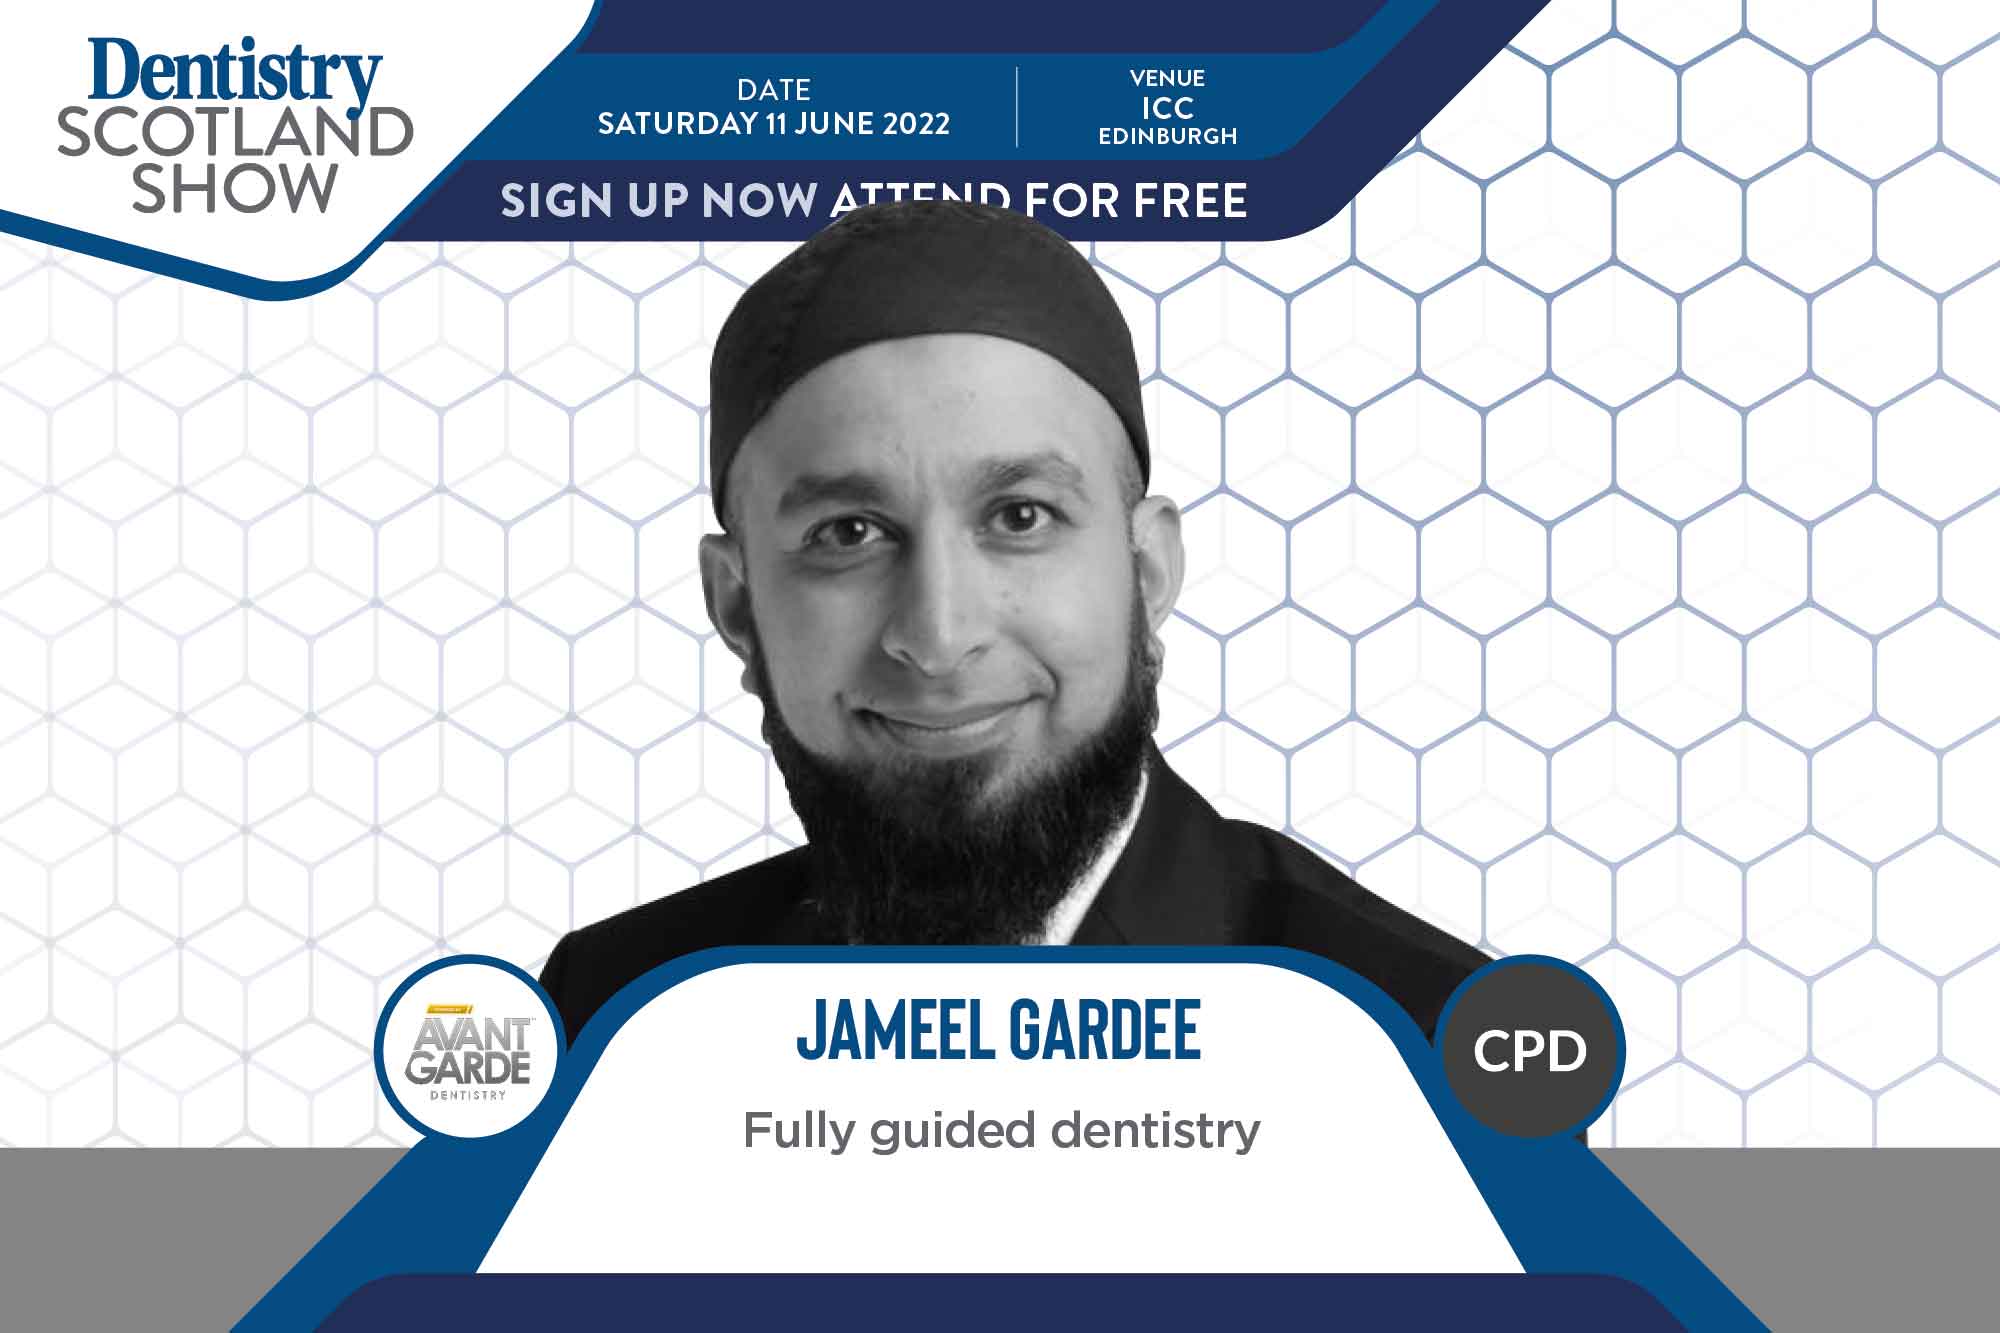 Jameel Gardee at the Dentistry Scotland Show